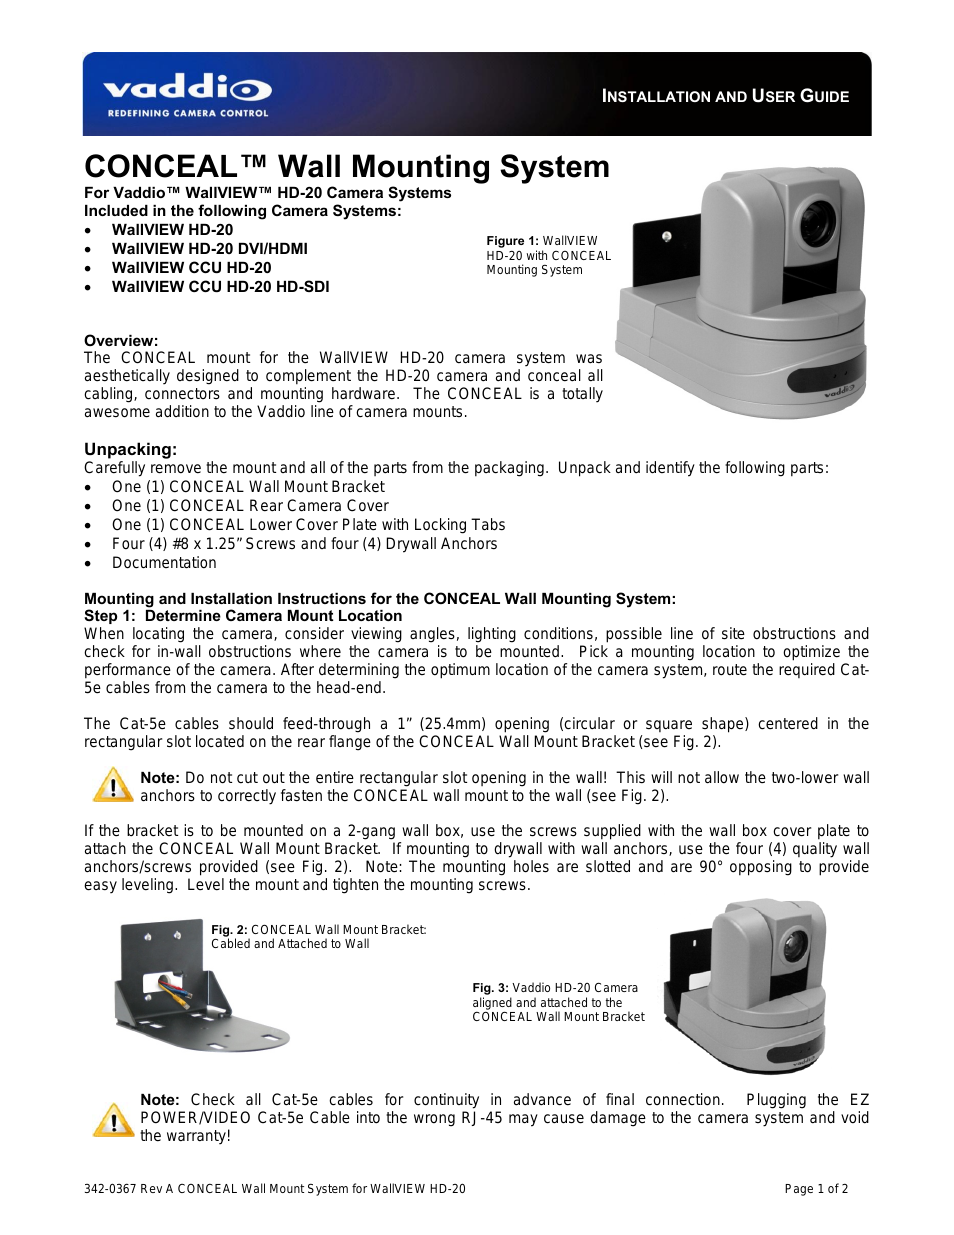 CONCEAL Wall Mounting System for WallVIEW CCU HD-20